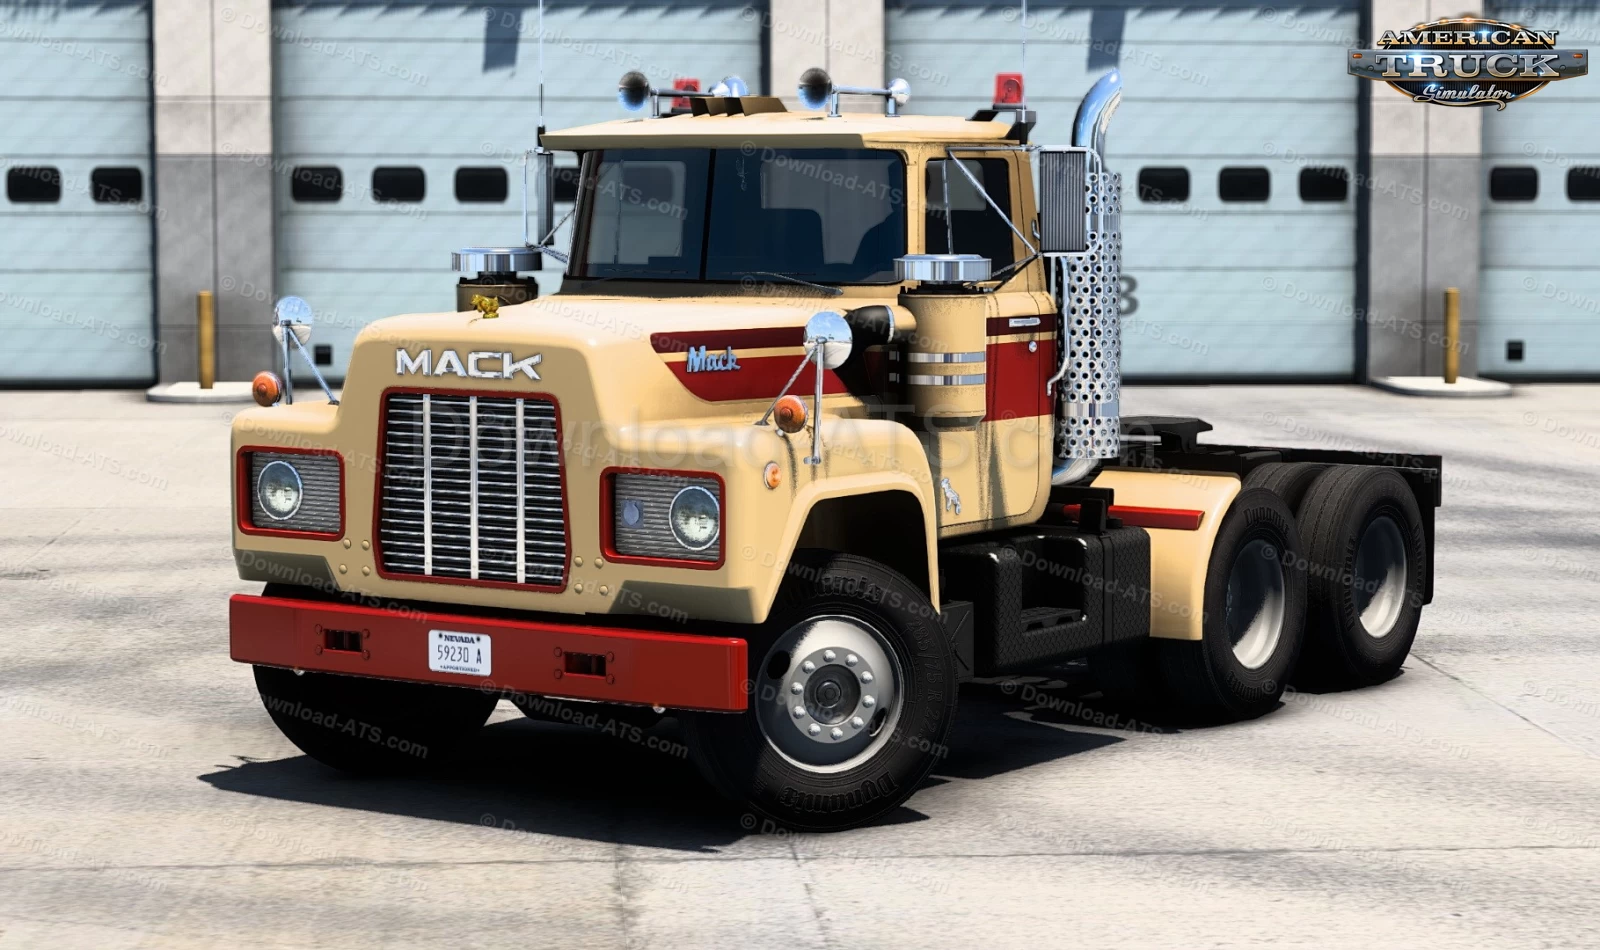 Mack R Series Truck v2.4 by Harven (1.46.x) for ATS